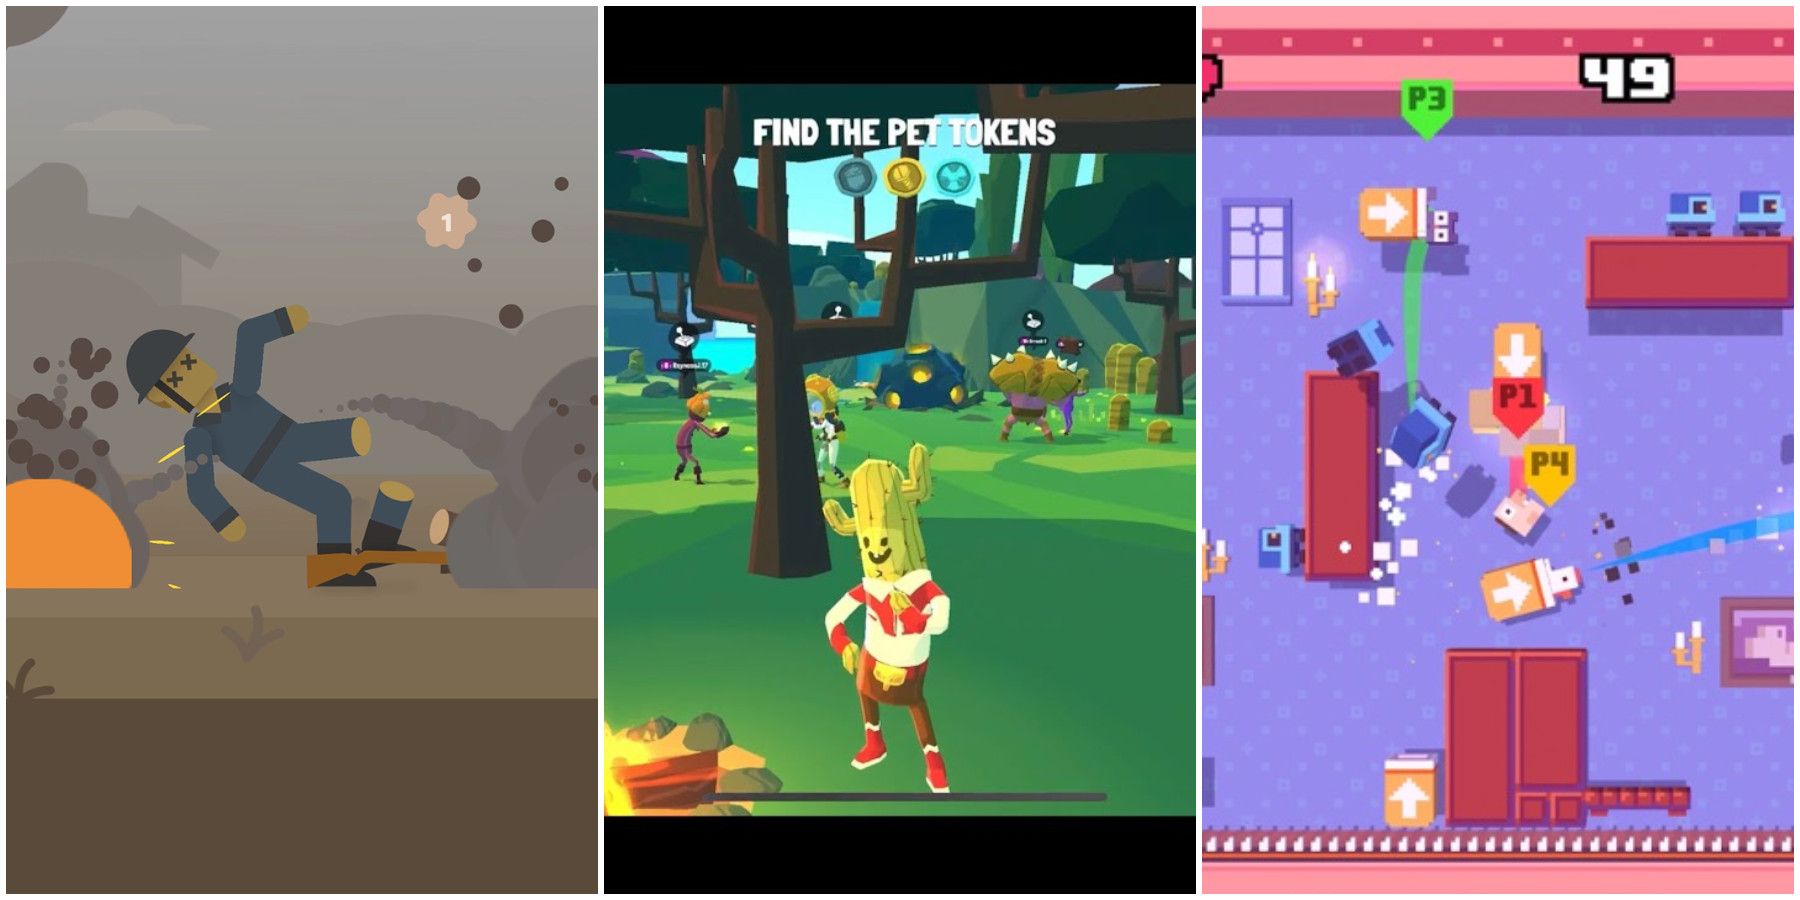 5 2 Player Games On Android iOS, Split Screen Games